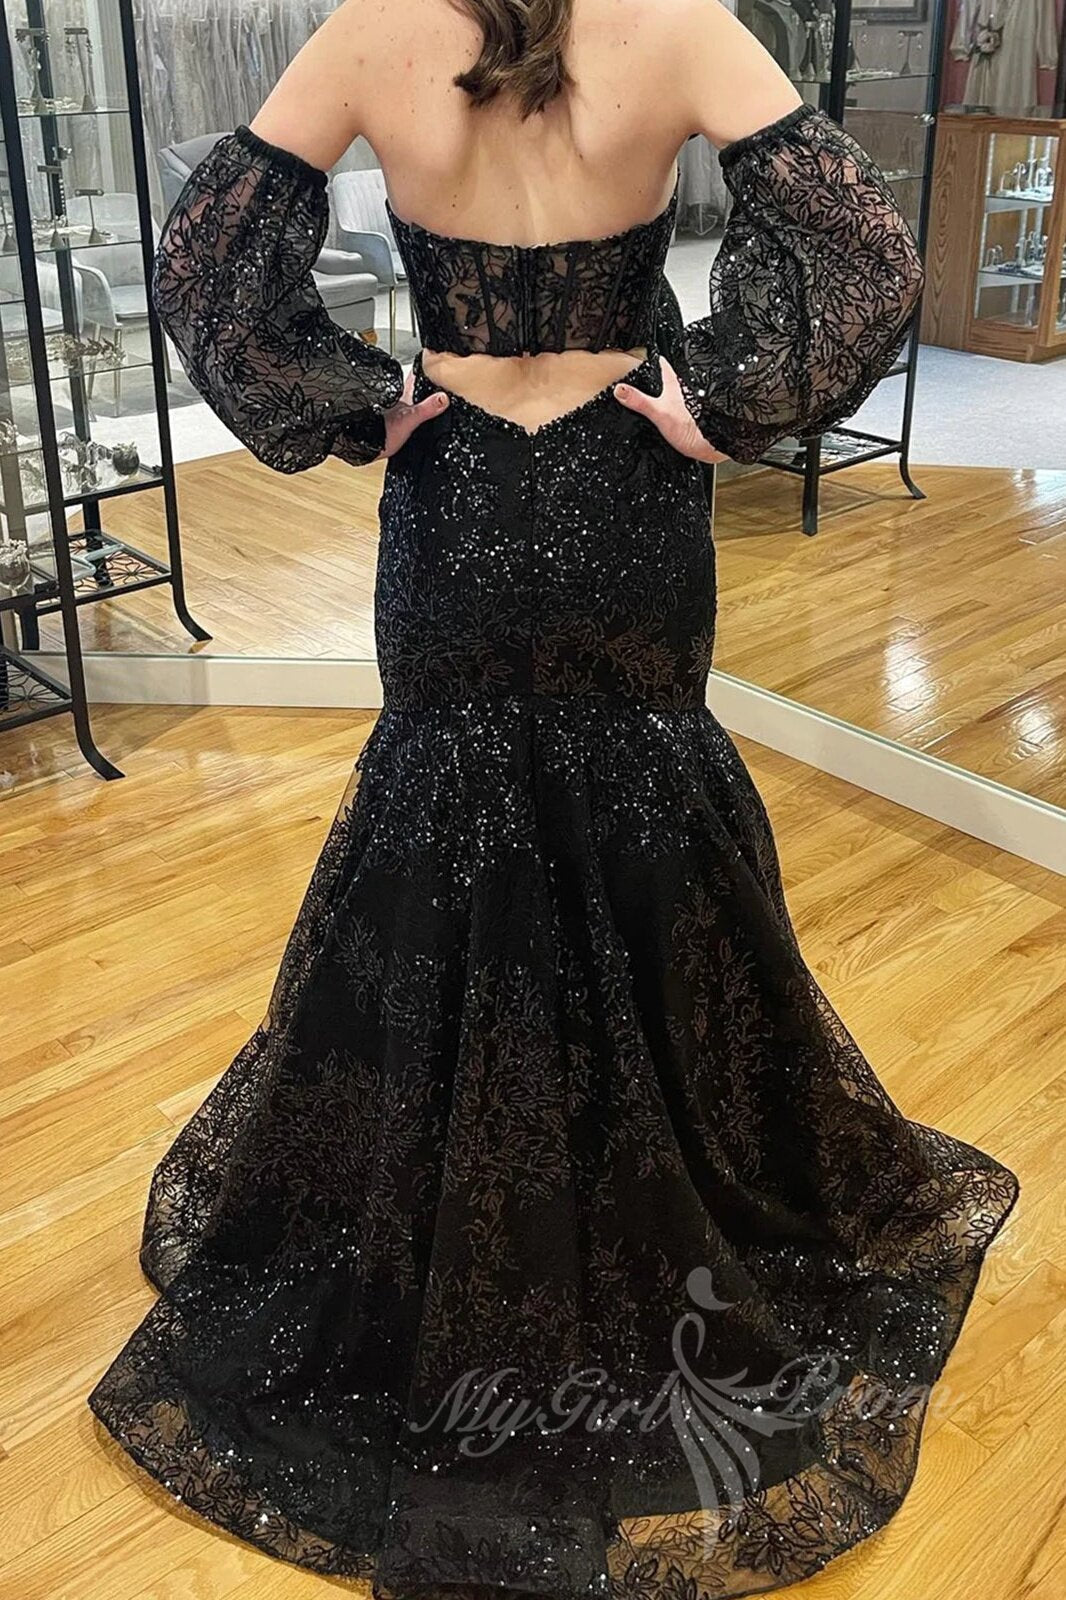 Black Lace Mermaid Prom Dresses With Puff Sleeves, Sweetheart Formal Dresses GP515